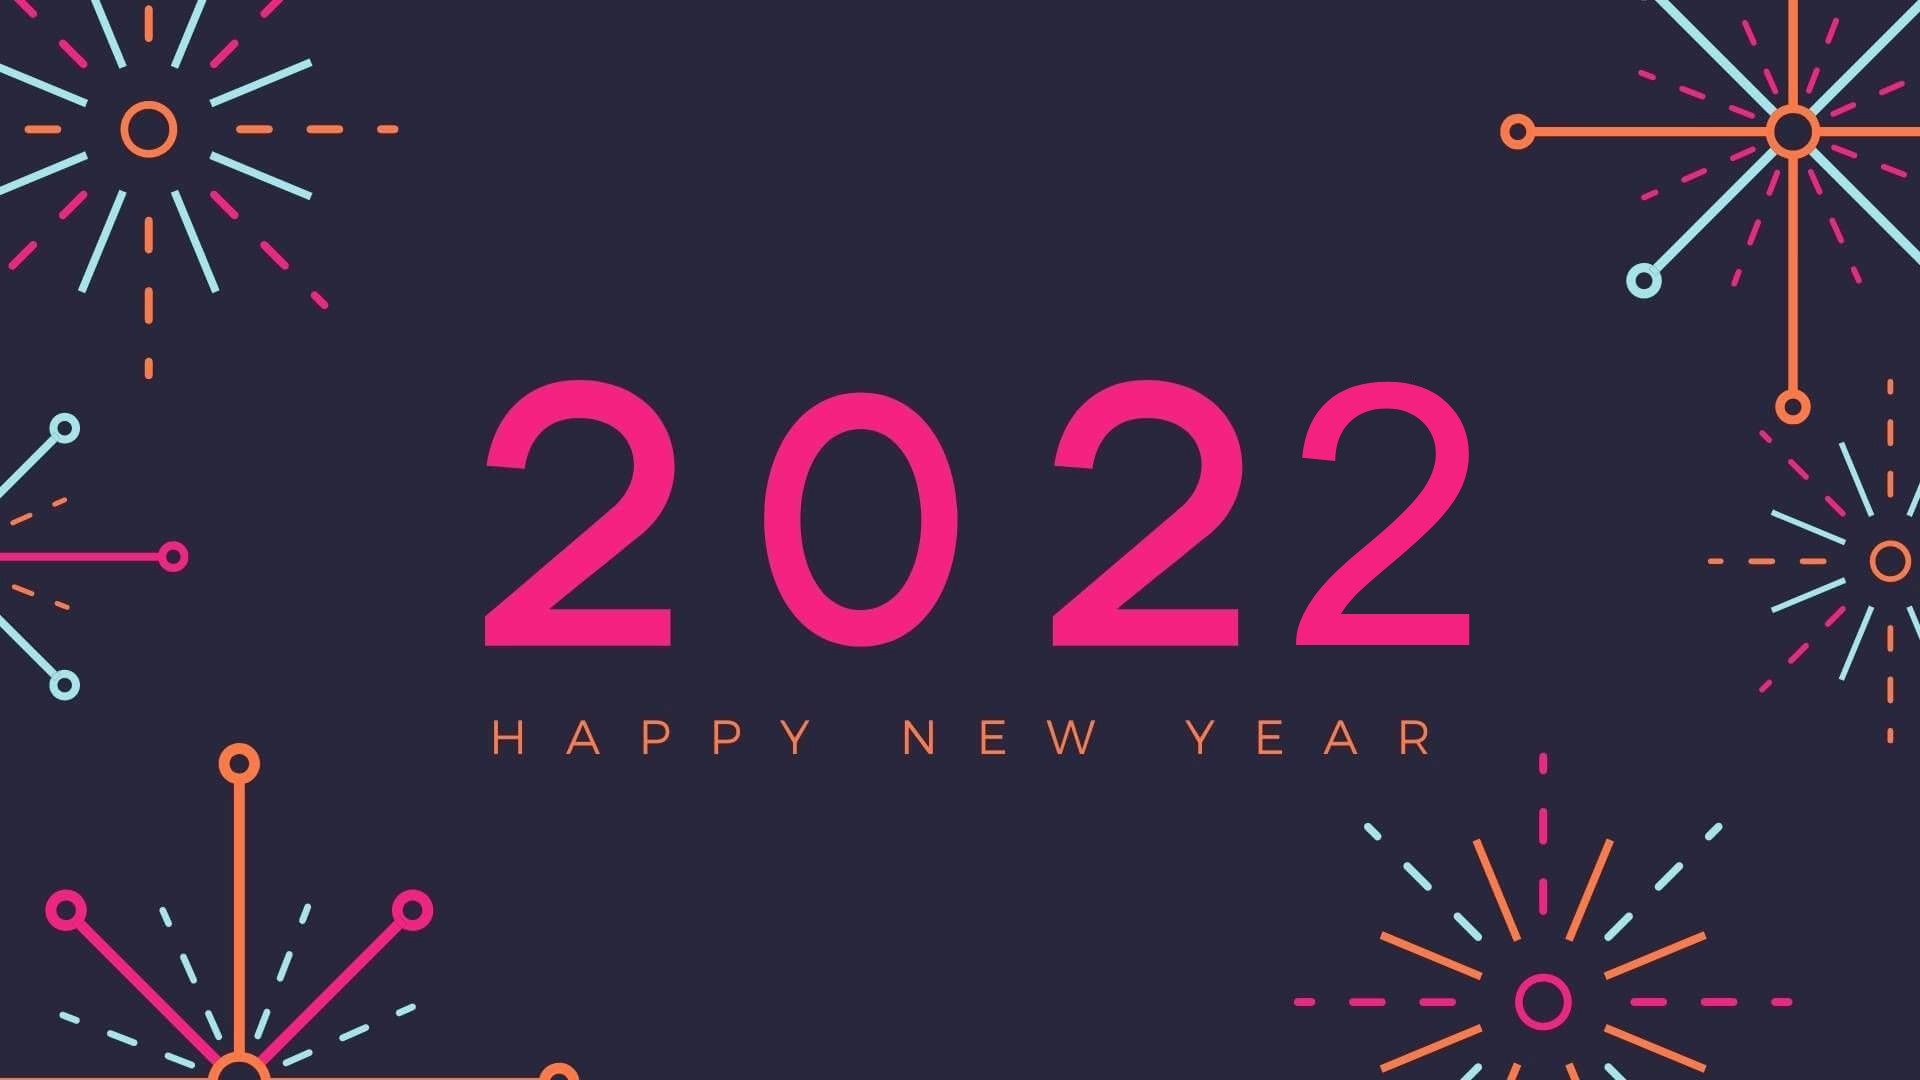 Send these Happy New Year 2022 Quotes to your Loved Ones